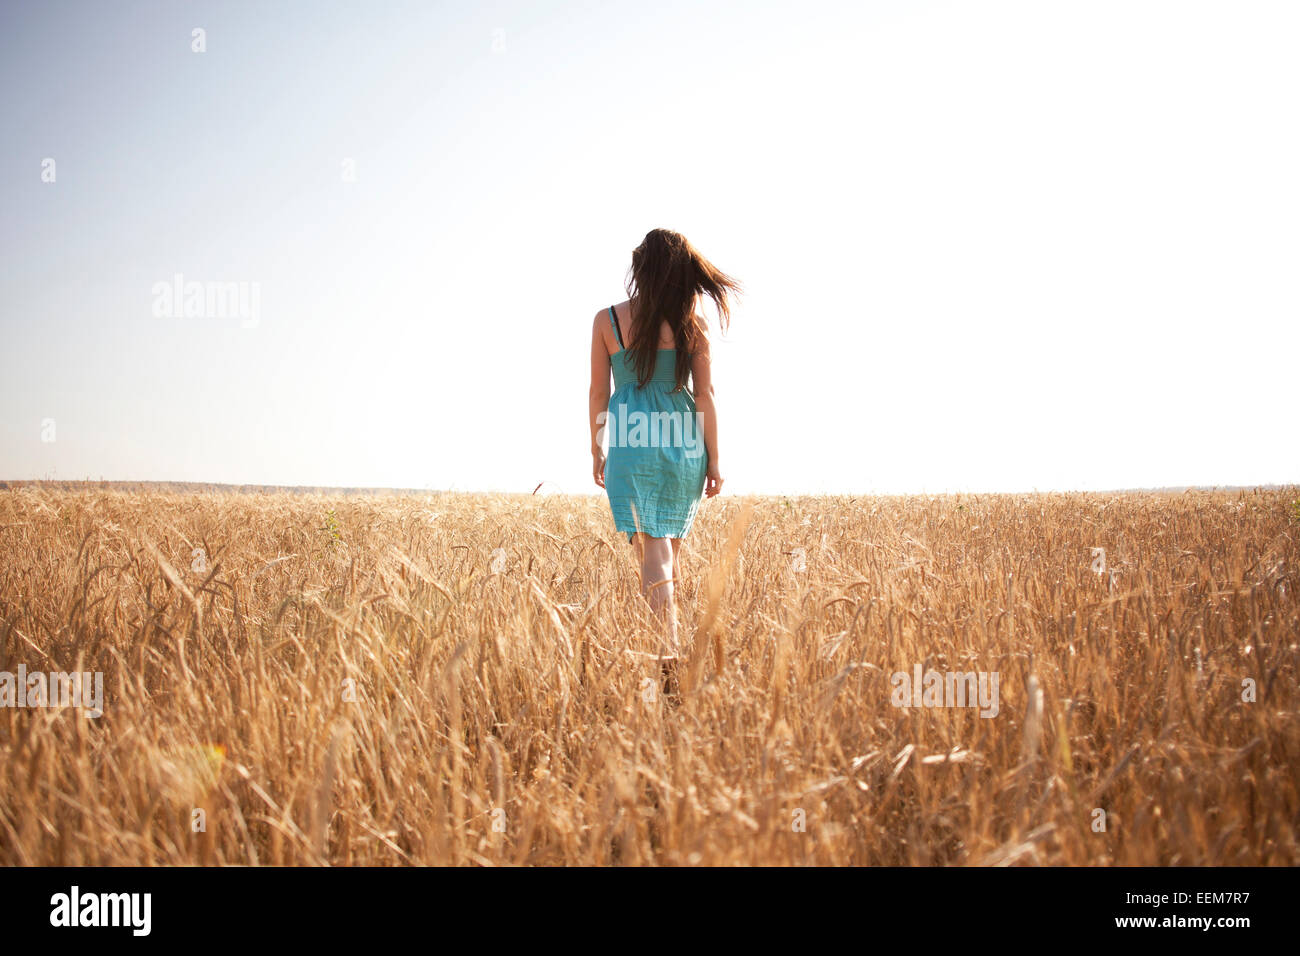 Caucasian woman walking in rural field Banque D'Images